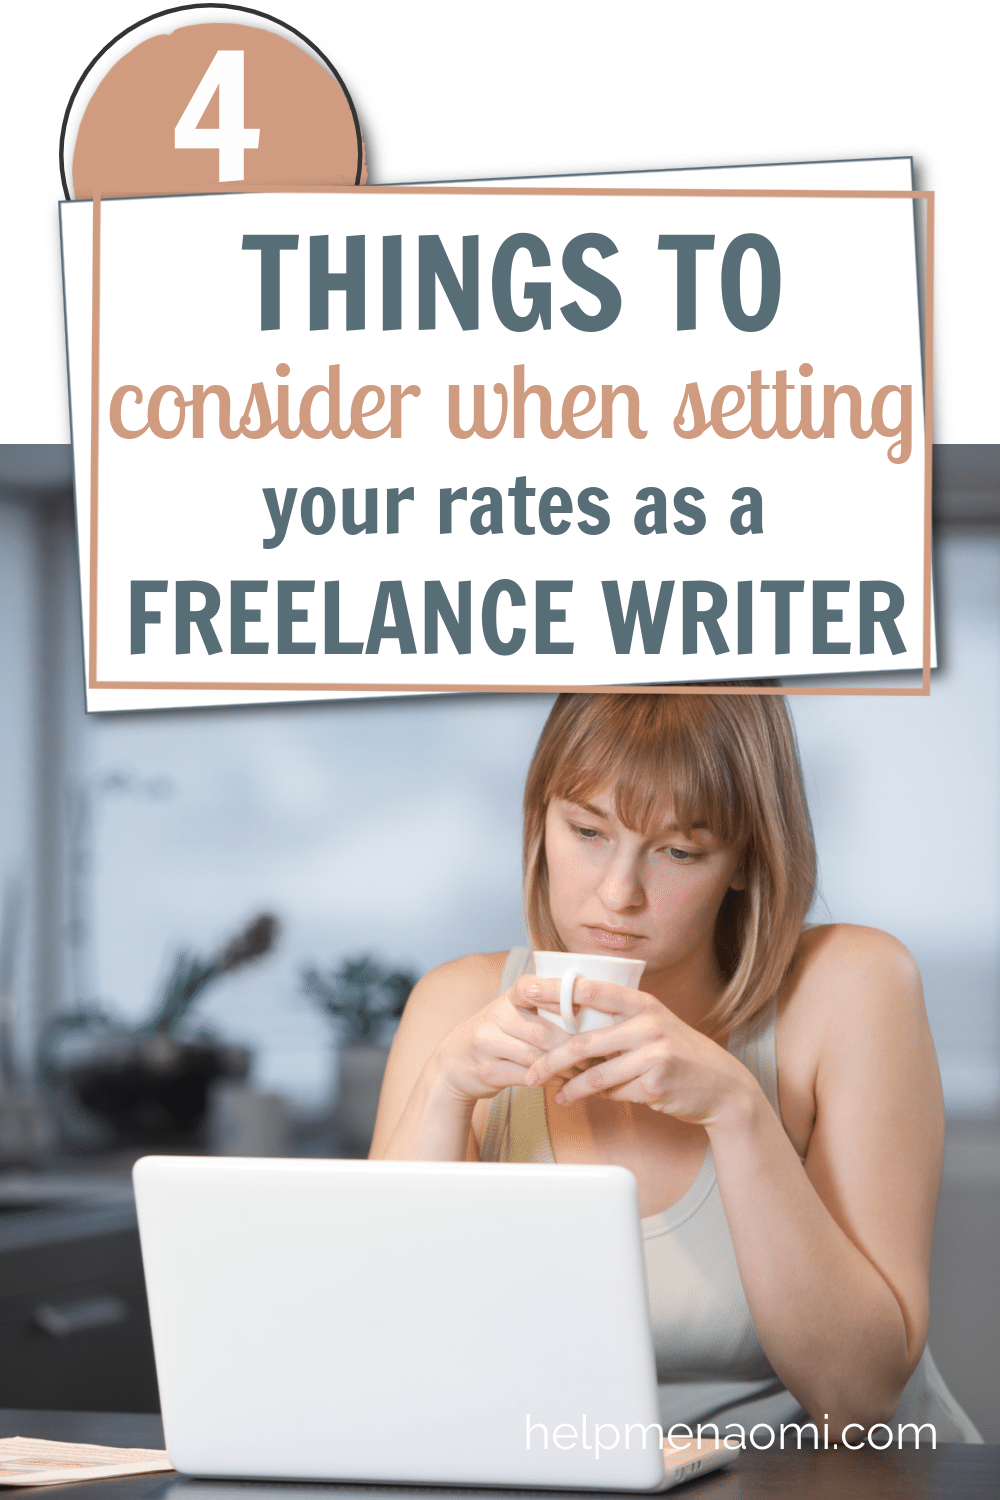 Lady sitting in front of her laptop while holding a cup of coffee and thinking under the words "4 Things to Consider When Setting Your Rates as a Freelance Writer"